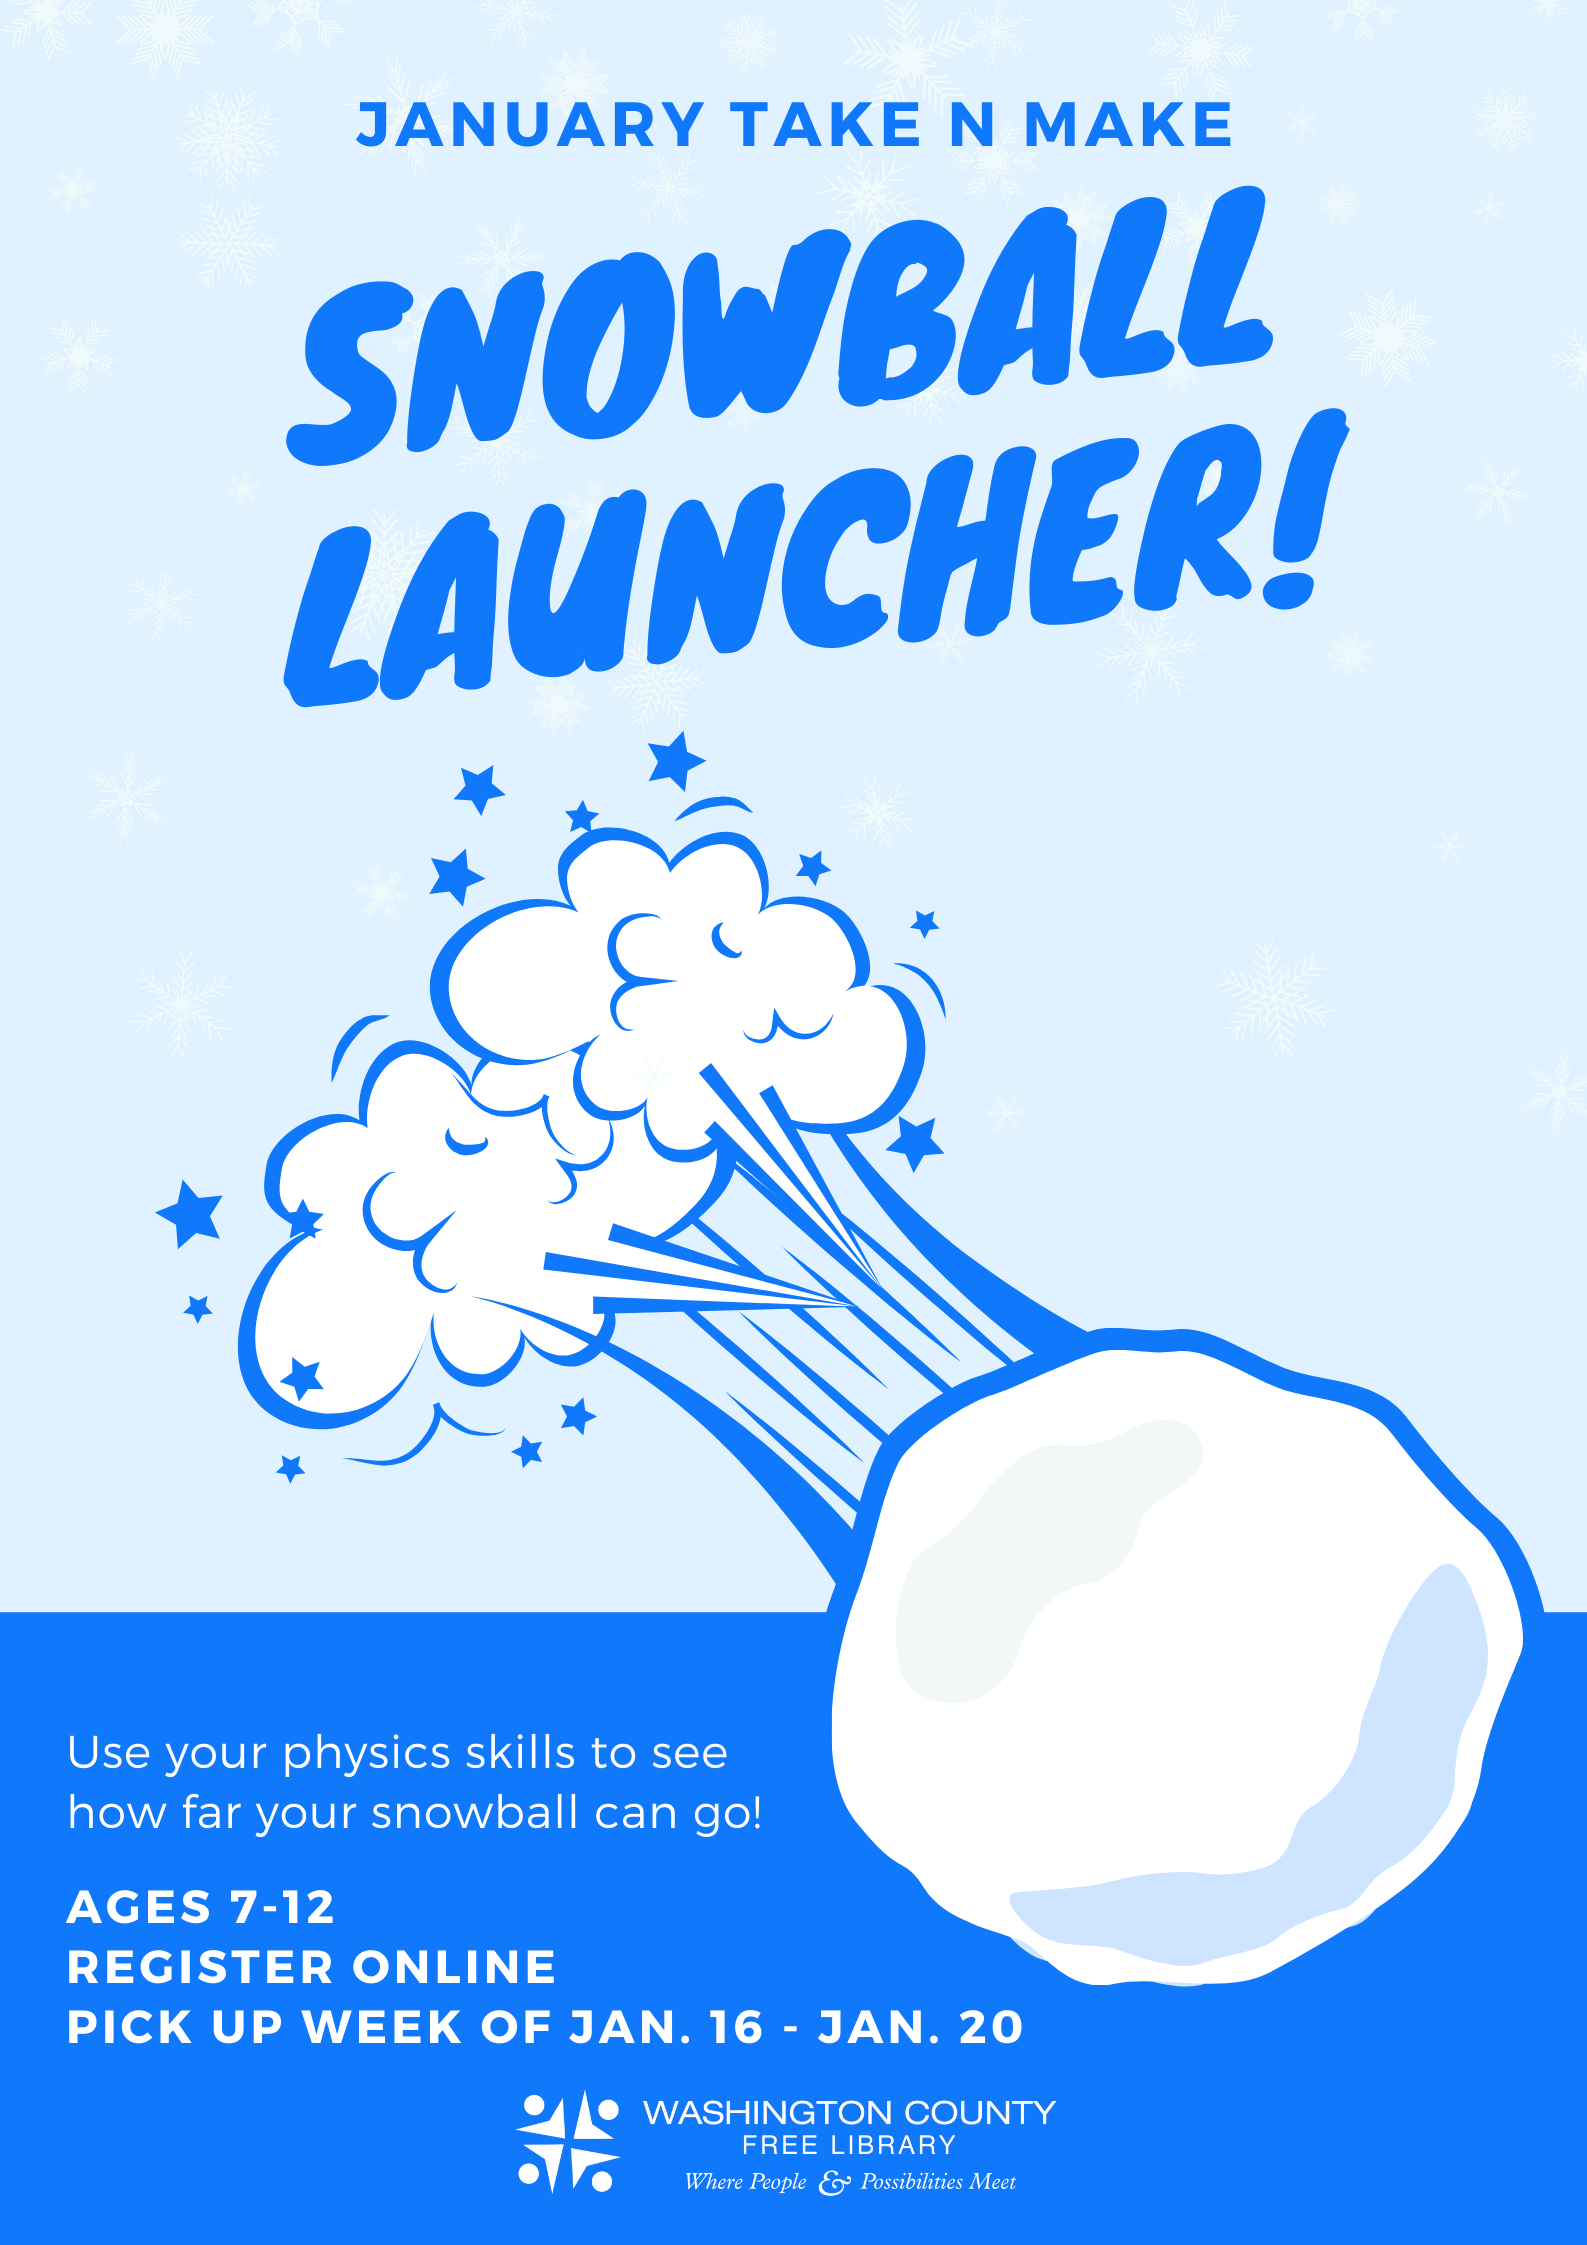 Flyer for January Take N Make Snowball Launcher. The flyer includes an illustration of a snowball being launched through the air. The text reads Use your physics skills to see how far your snowball can go! Ages 7 through 12. Register online. Pick up week of Jan. 16 through Jan. 20